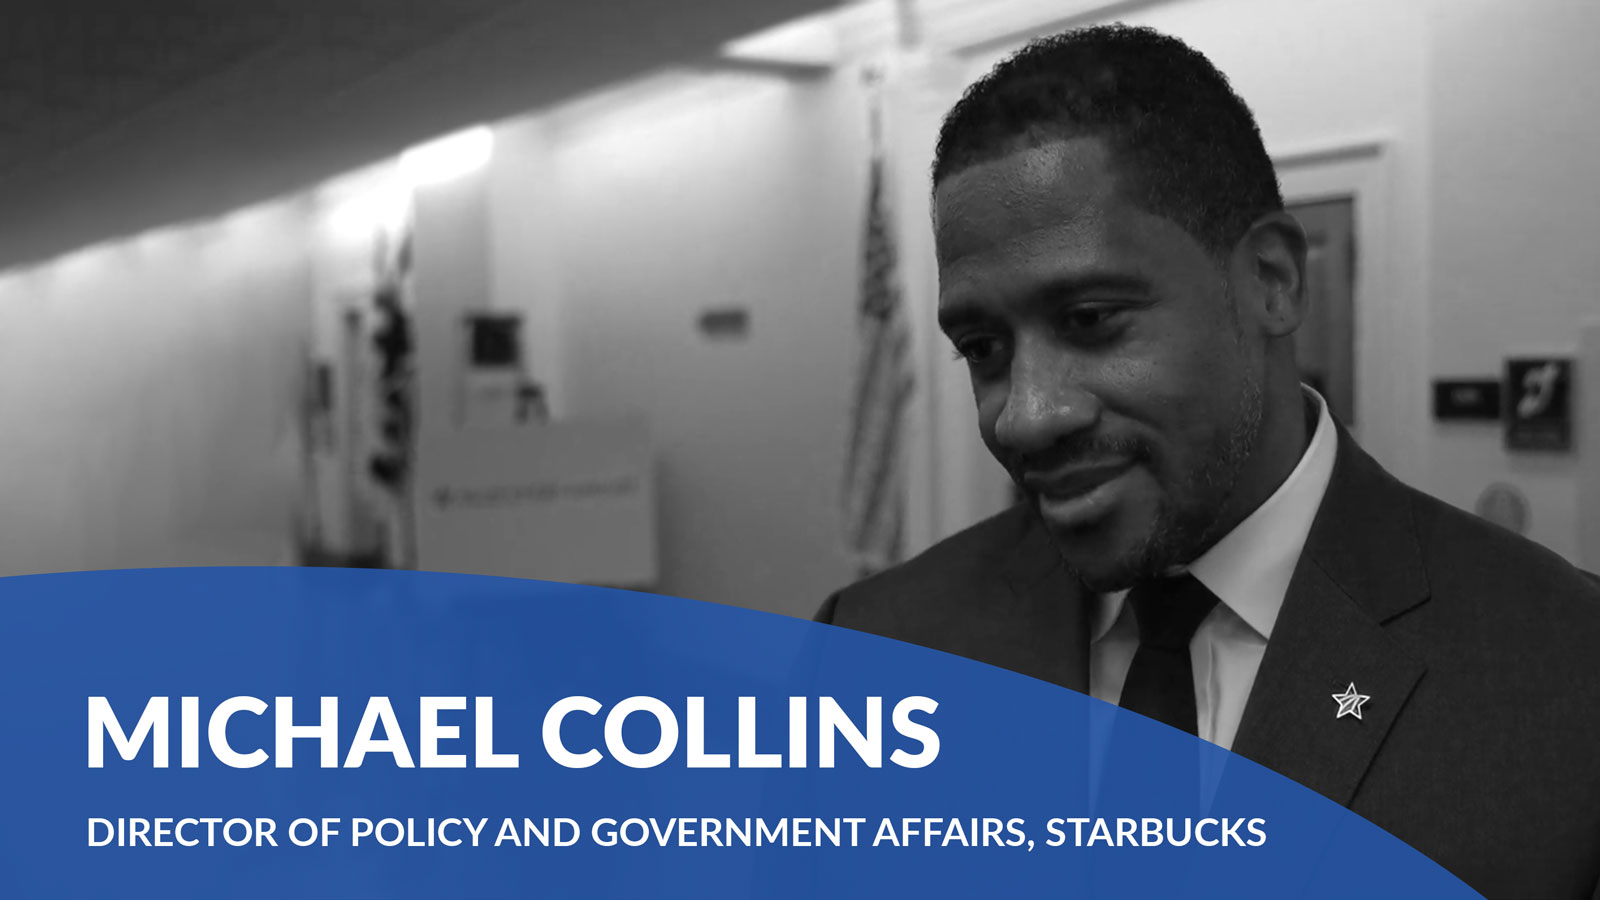 michael collins director of policy and government affairs, starbucks